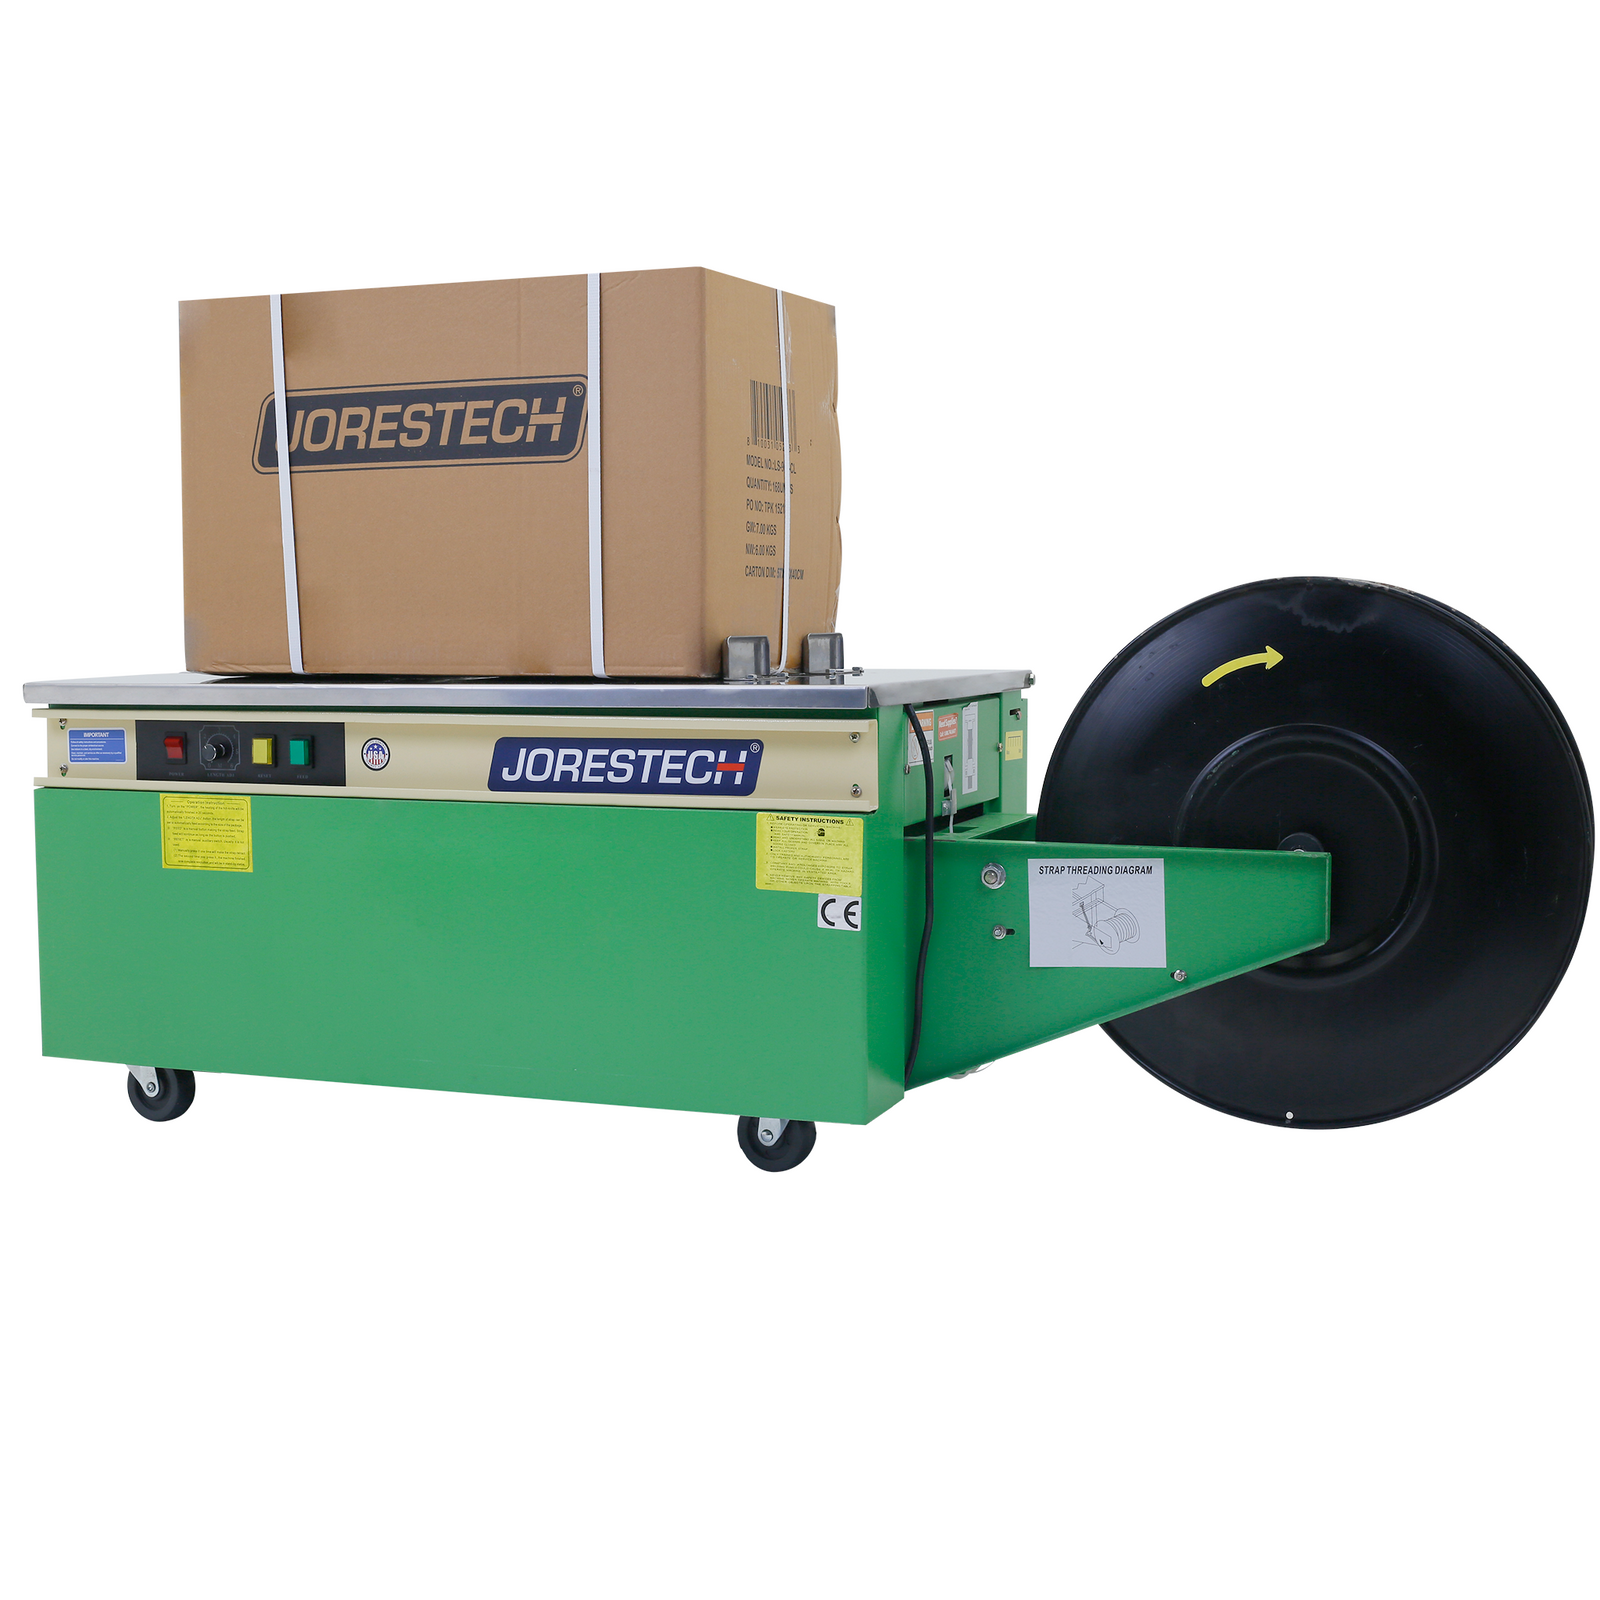 JORES TECHNOLOGIES® low profile strapping machine with a freshly strapped cardboard box on top